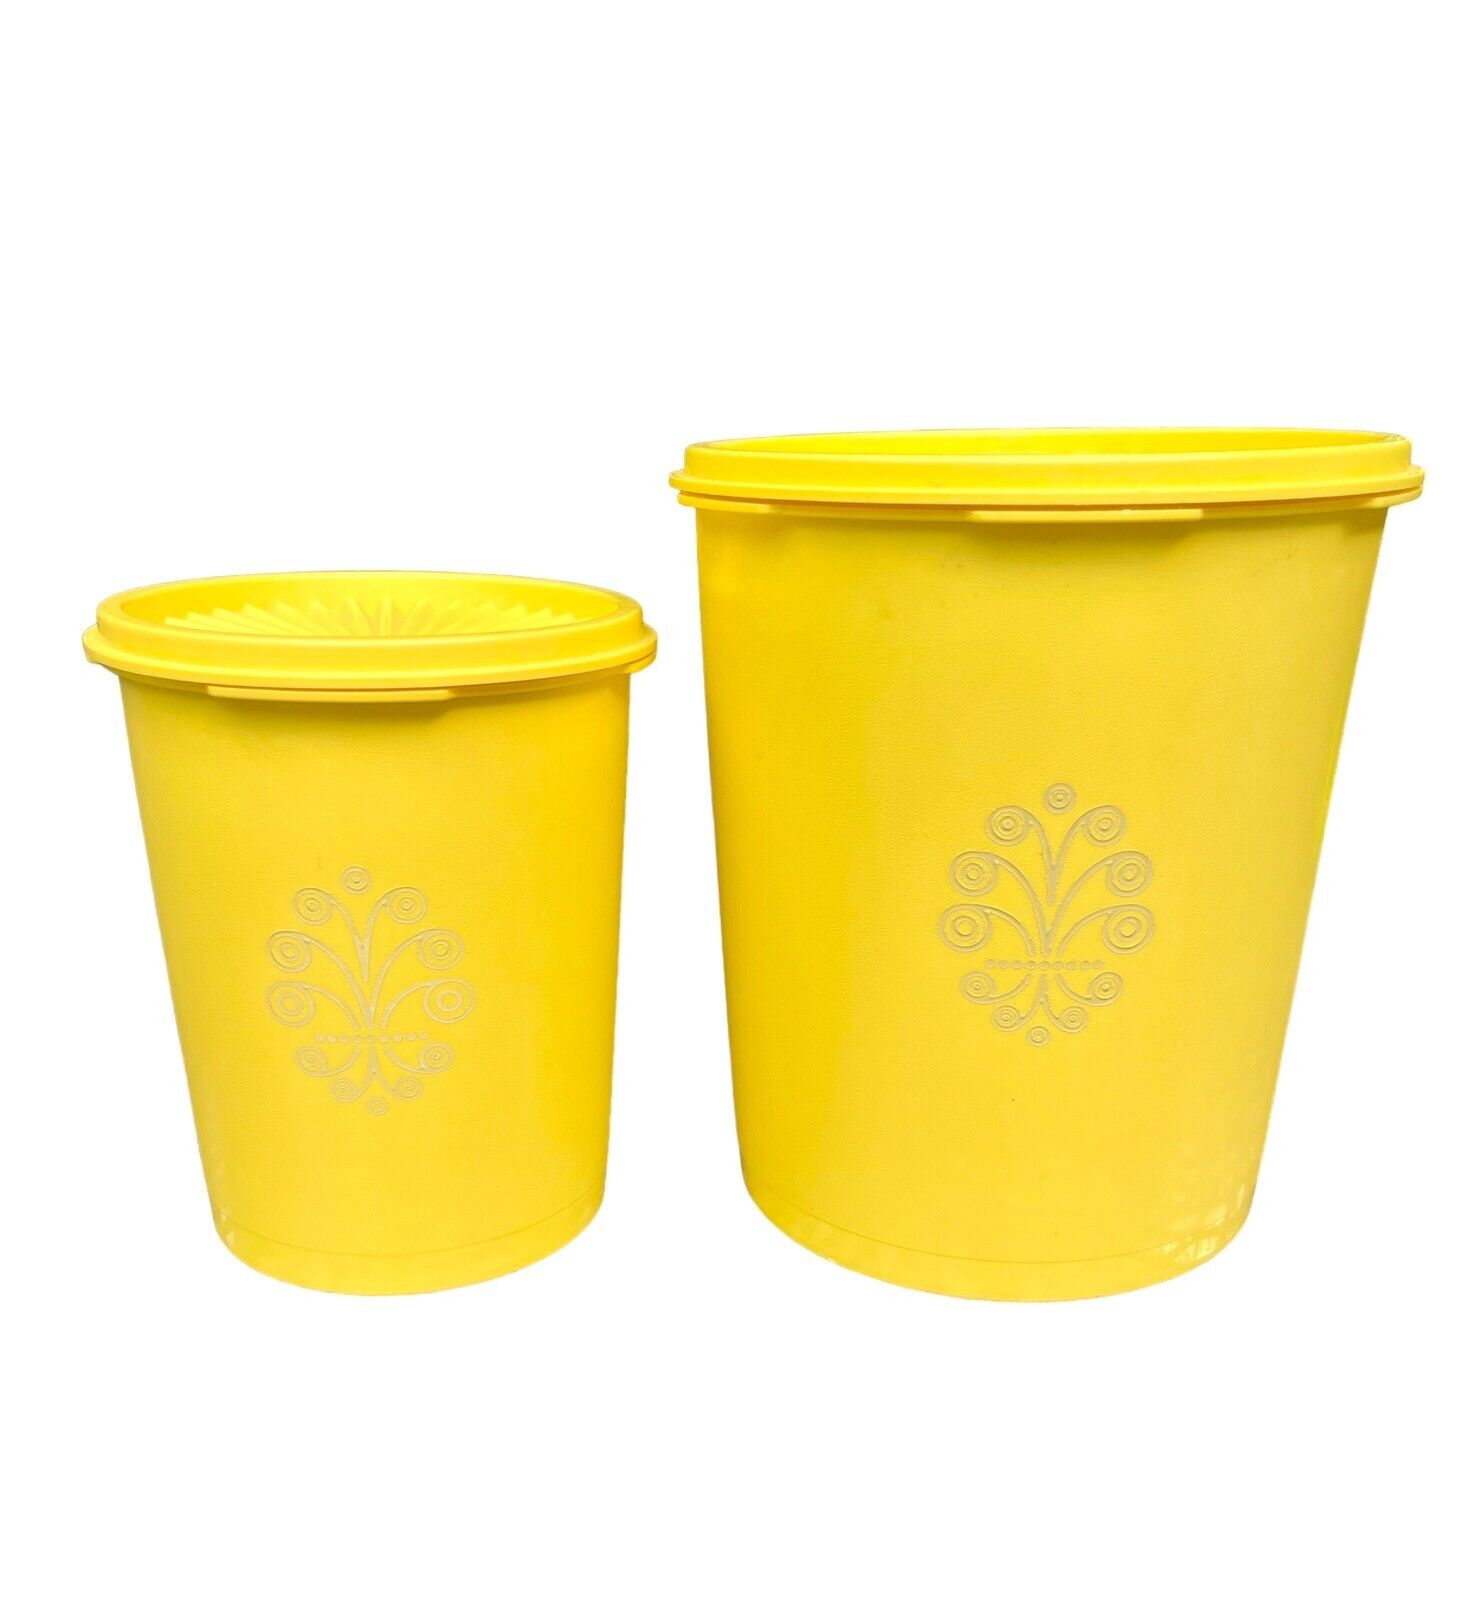 2 Vtg 70s Servalier Tupperware Yellow Canisters & Lids 807-7 811-13 6.5” & 5”